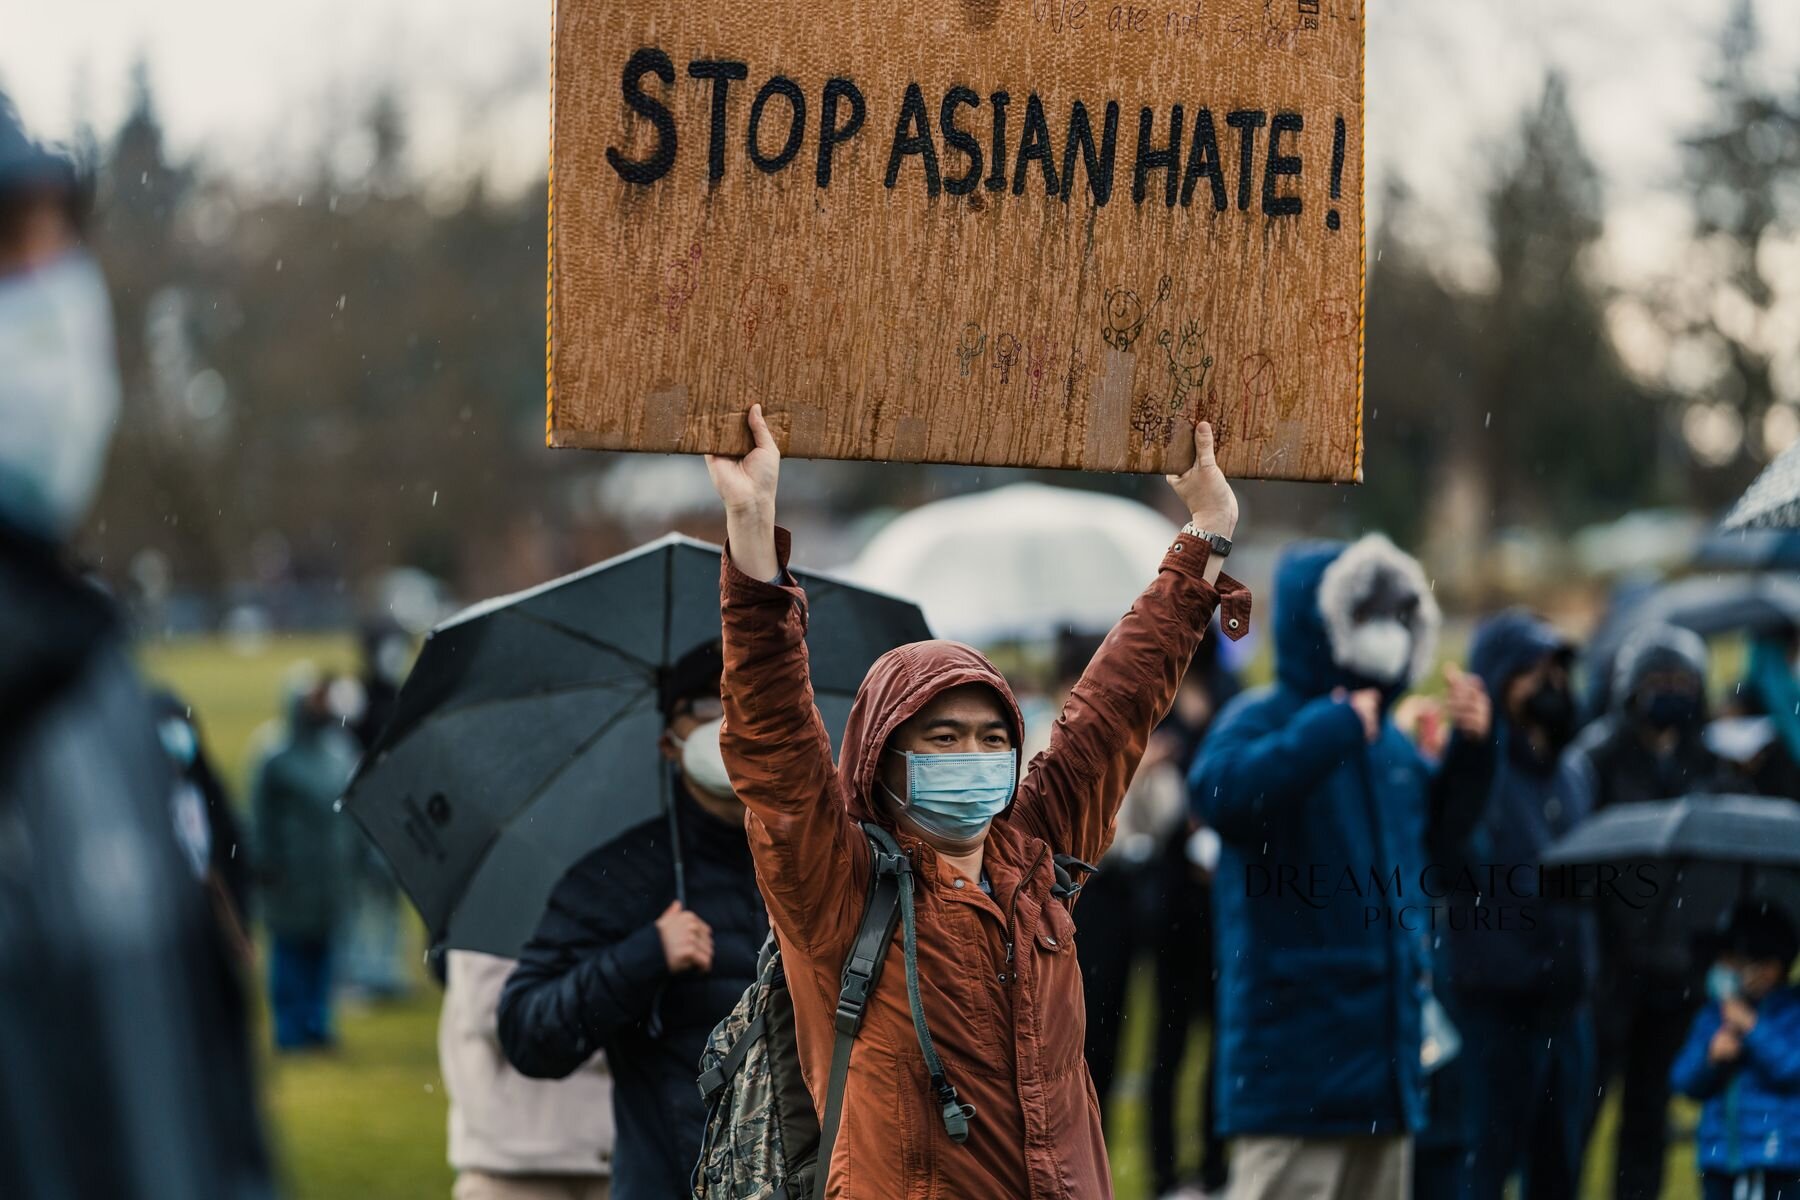 Bellevue Downtown Park Stop Asian Hate Rally